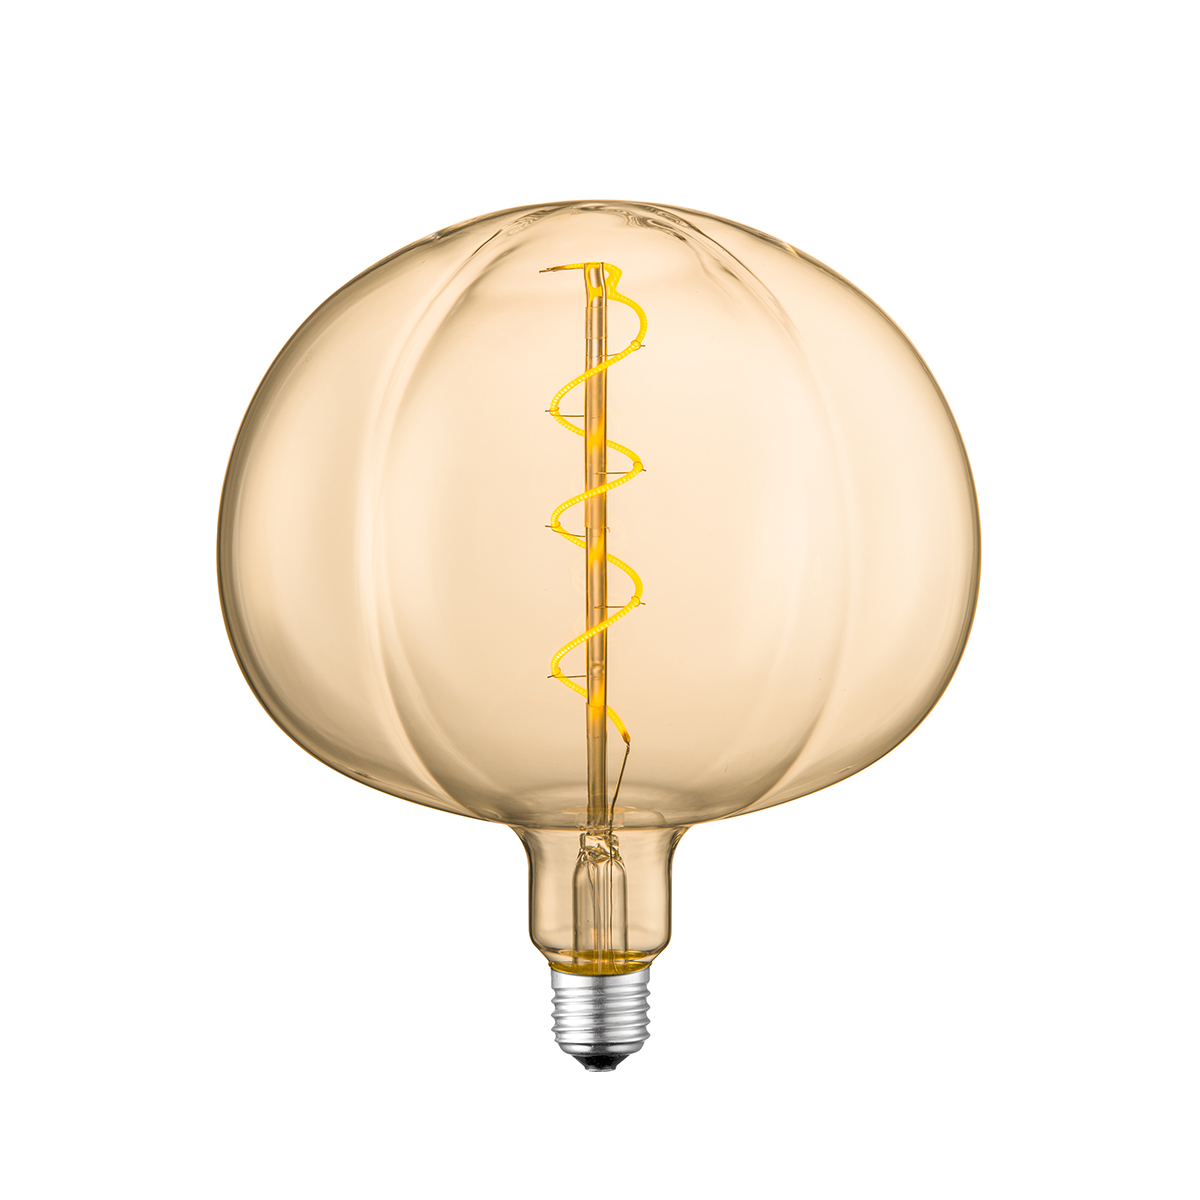 Tangla lighting - TLB-8106-04AM - LED Light Bulb Single Spiral filament - special 4W amber - buds - dimmable - E27